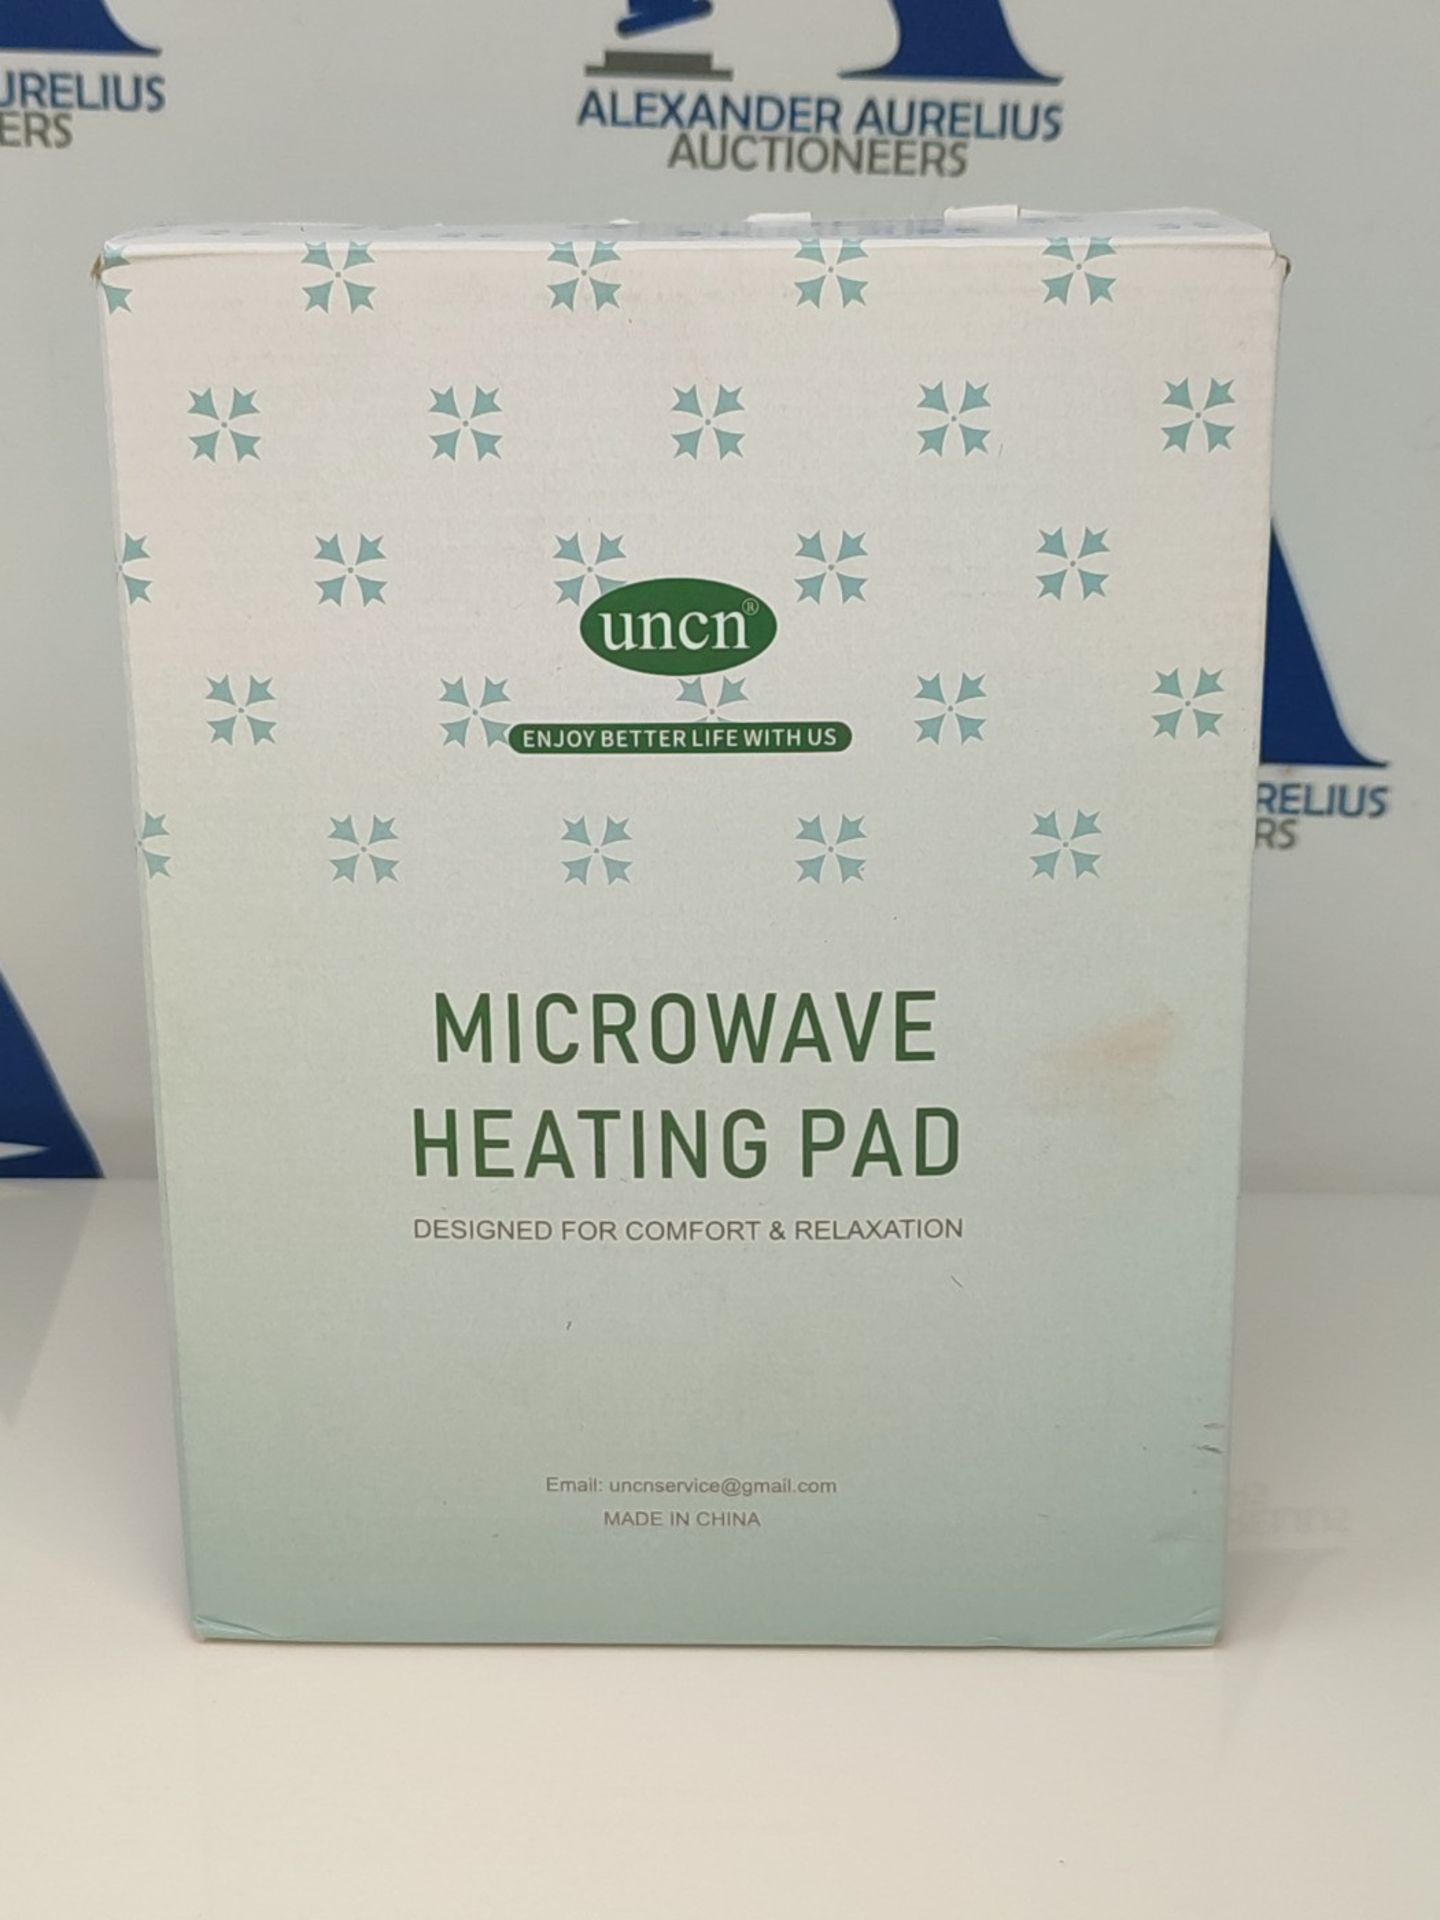 UNCN Wide Microwave Heat Pad 15 * 9" with Washable Cover - Unscented Wheat Bag for Bac